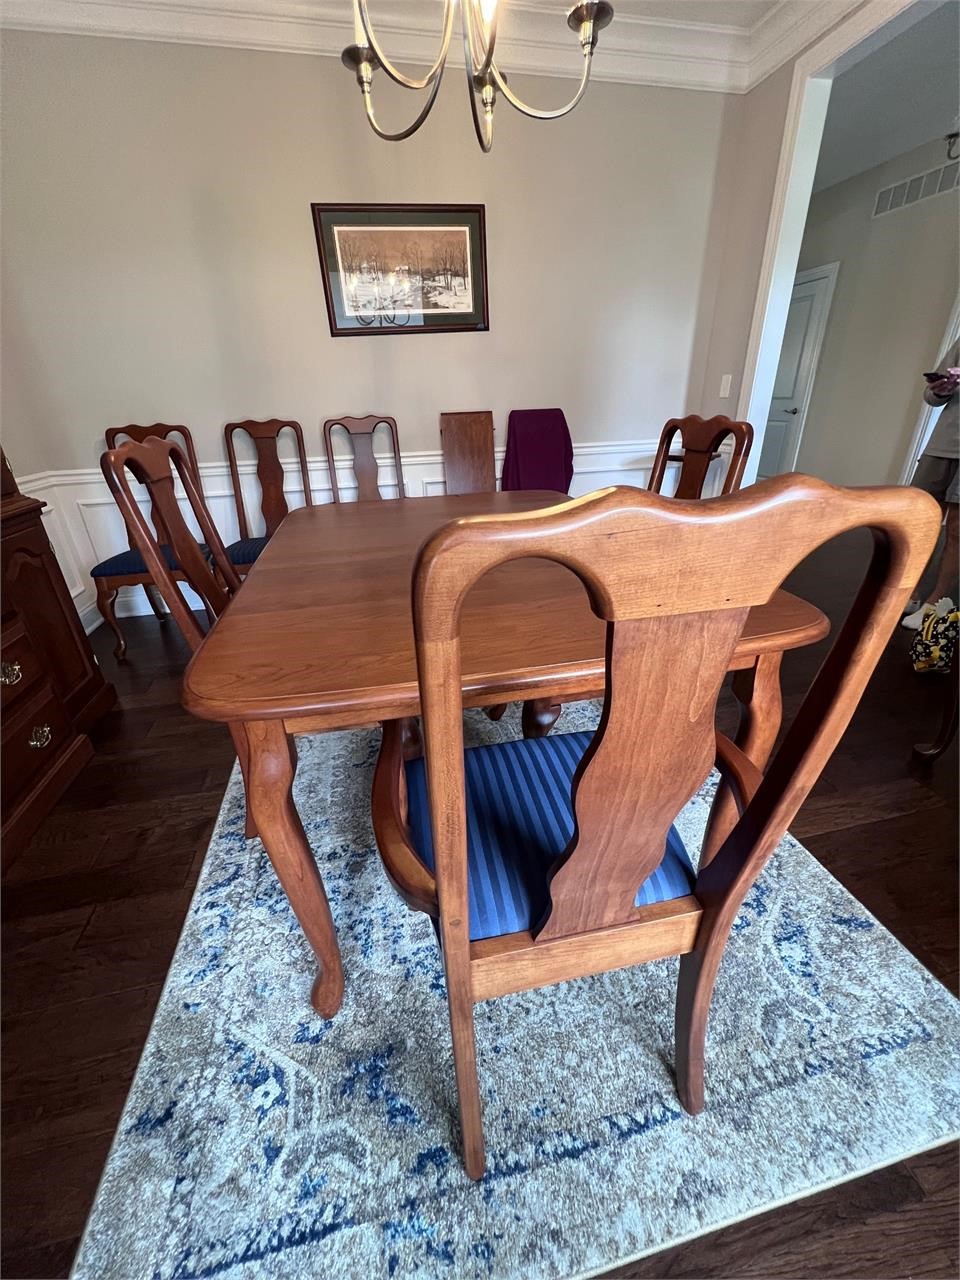 Amish Built Cherry Dining Tables & Chair Set